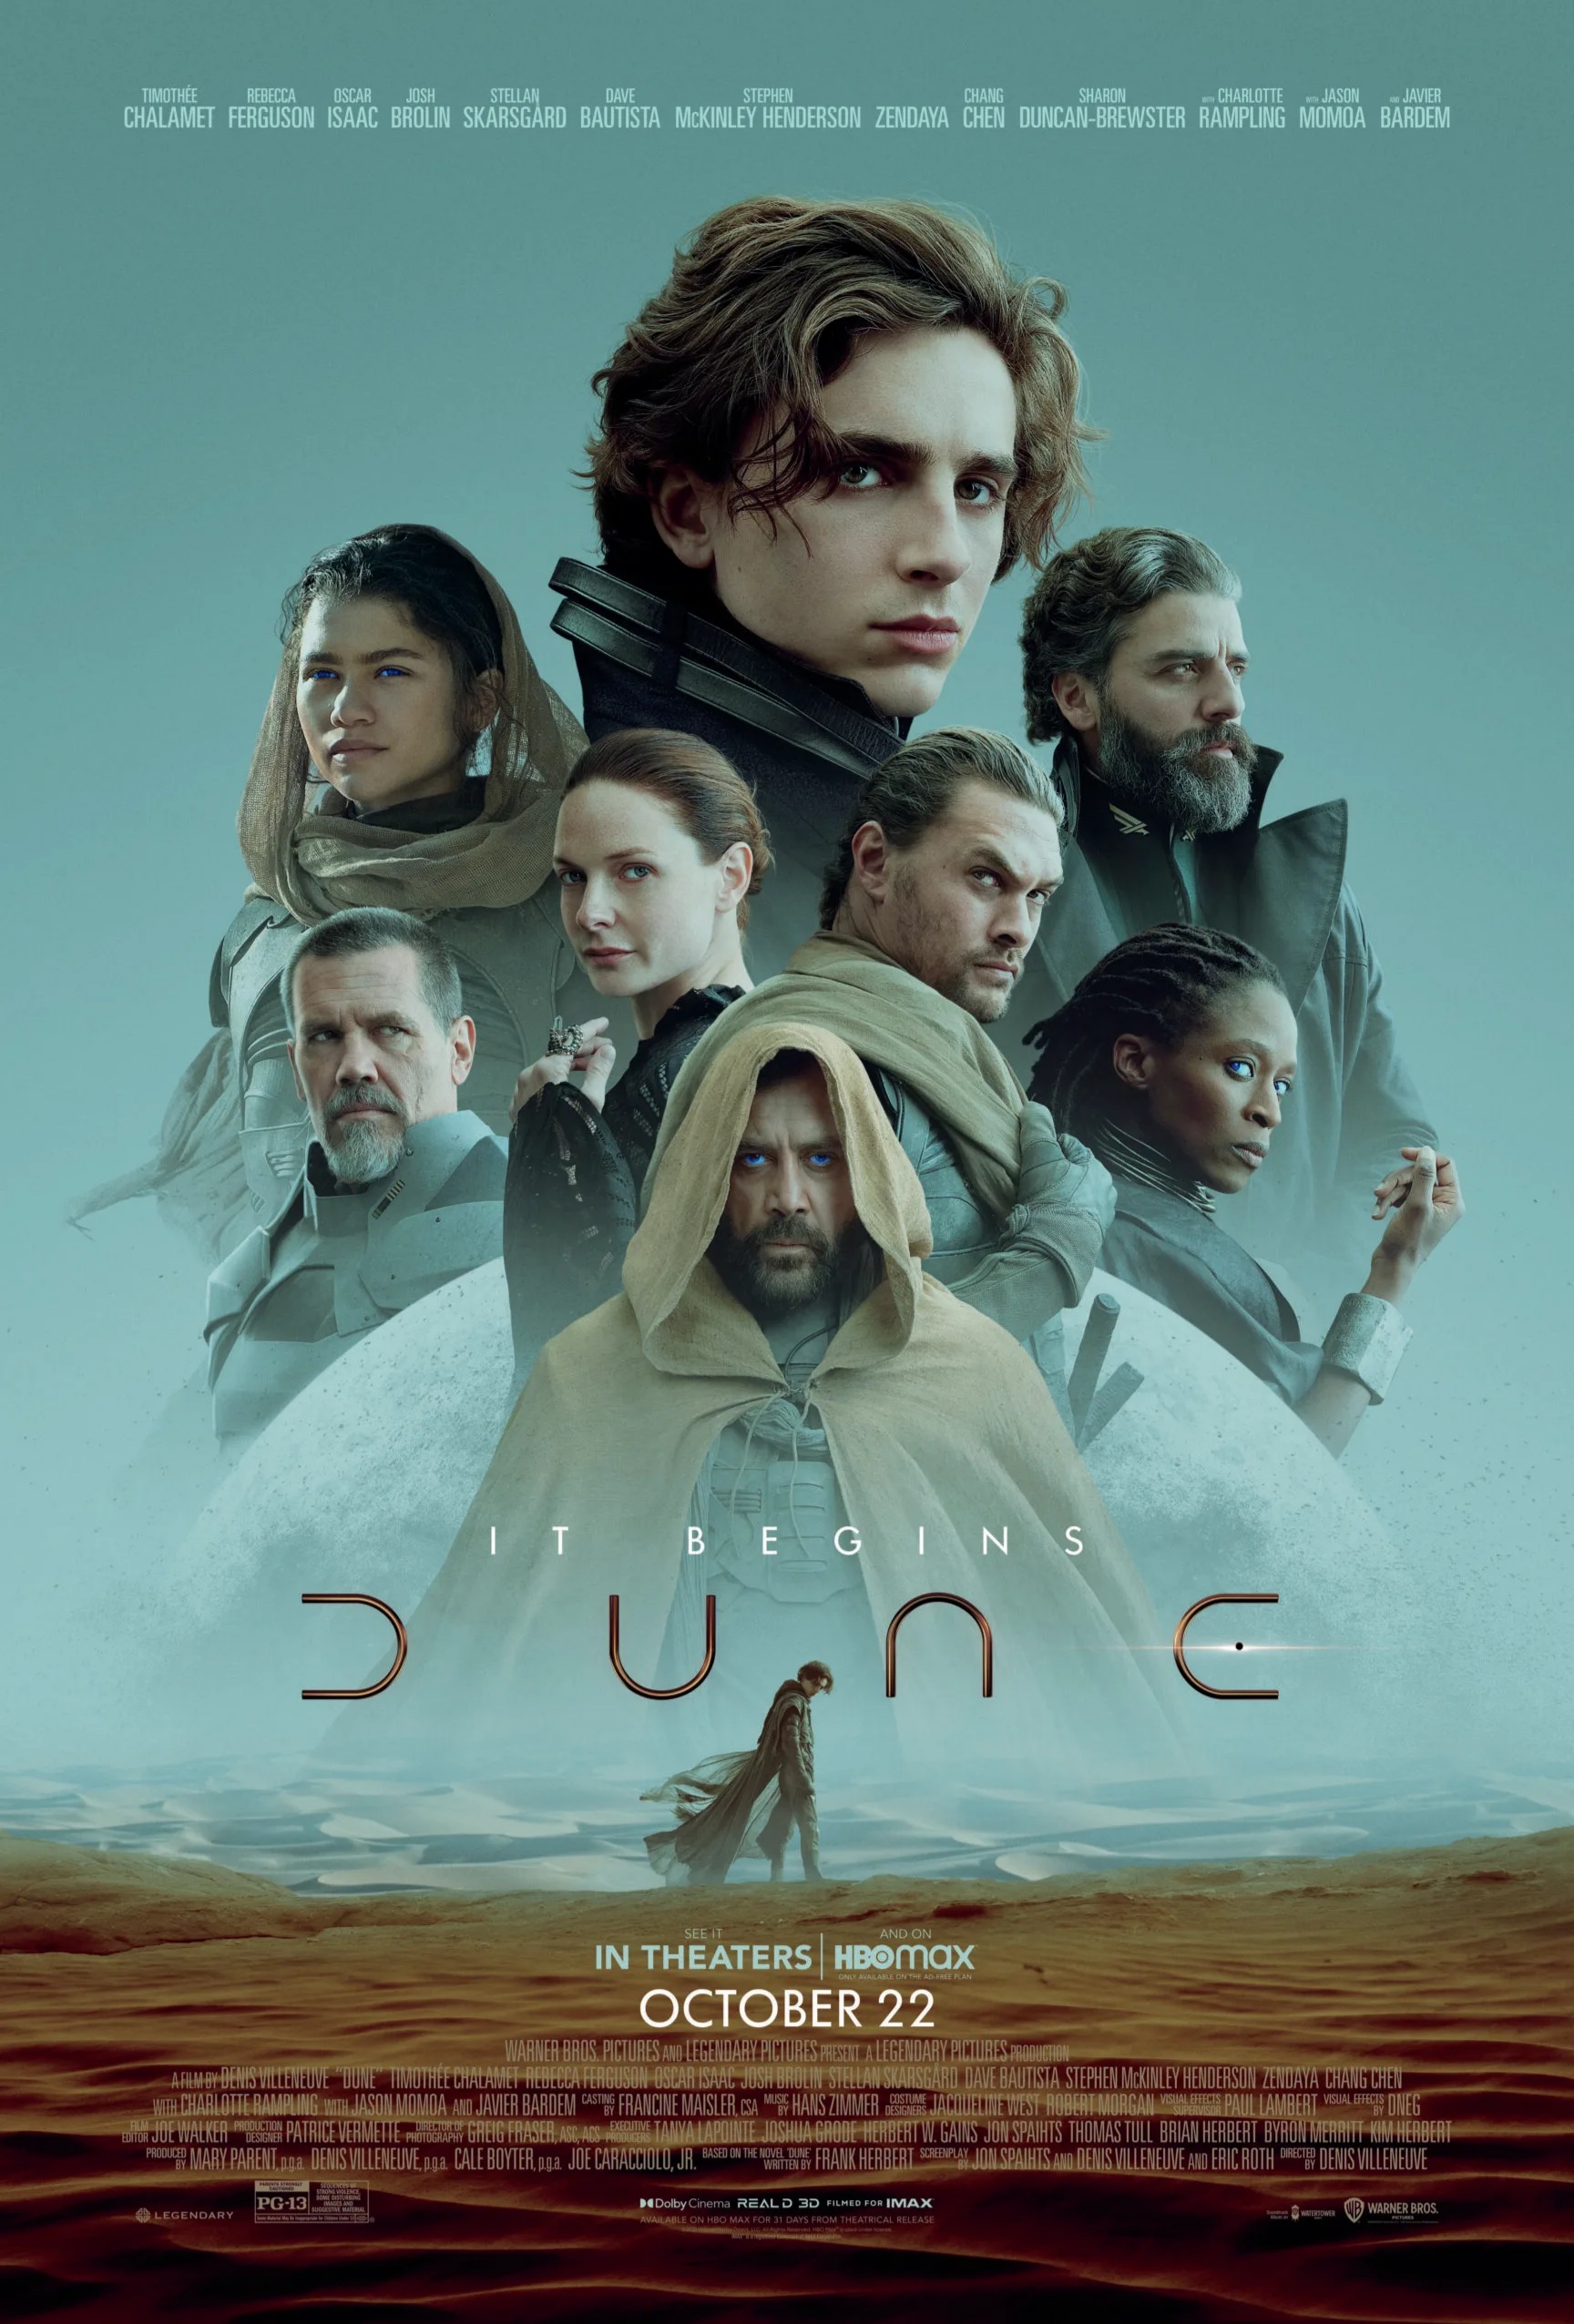 Movie Poster for Dune